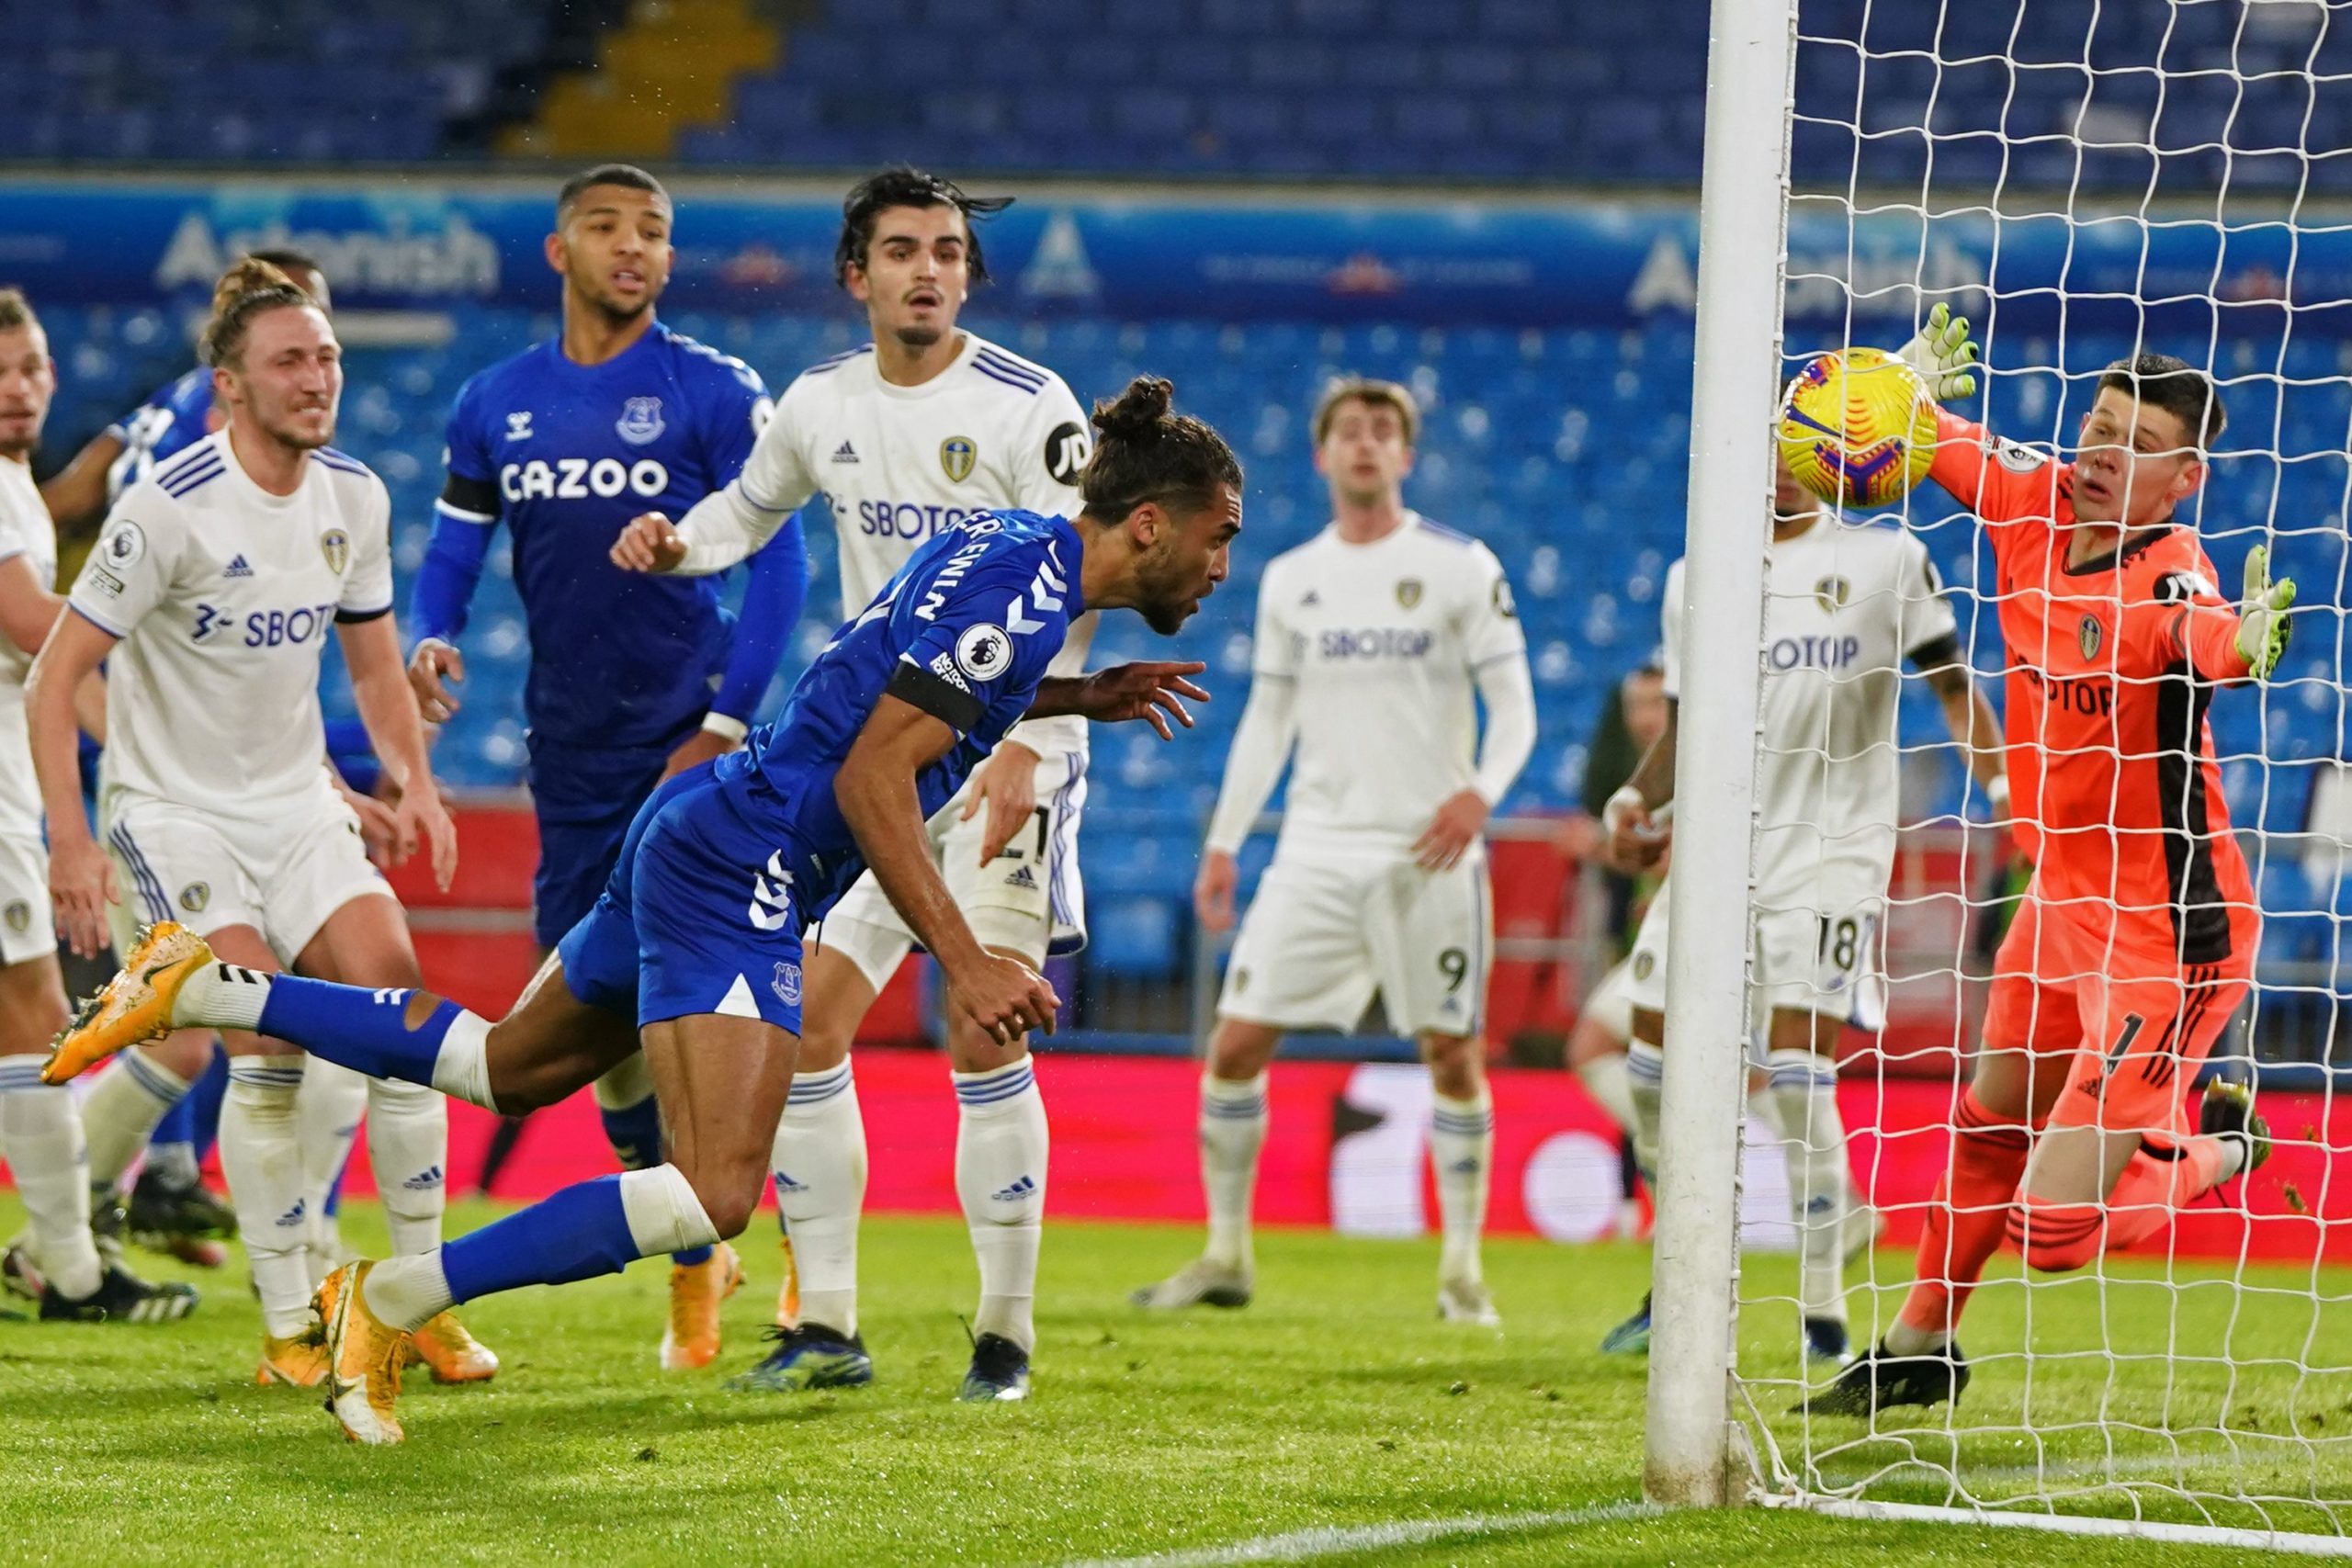 Everton Players Rated In Victory Over Leeds United (Andre Gomes can be seen in the picture)